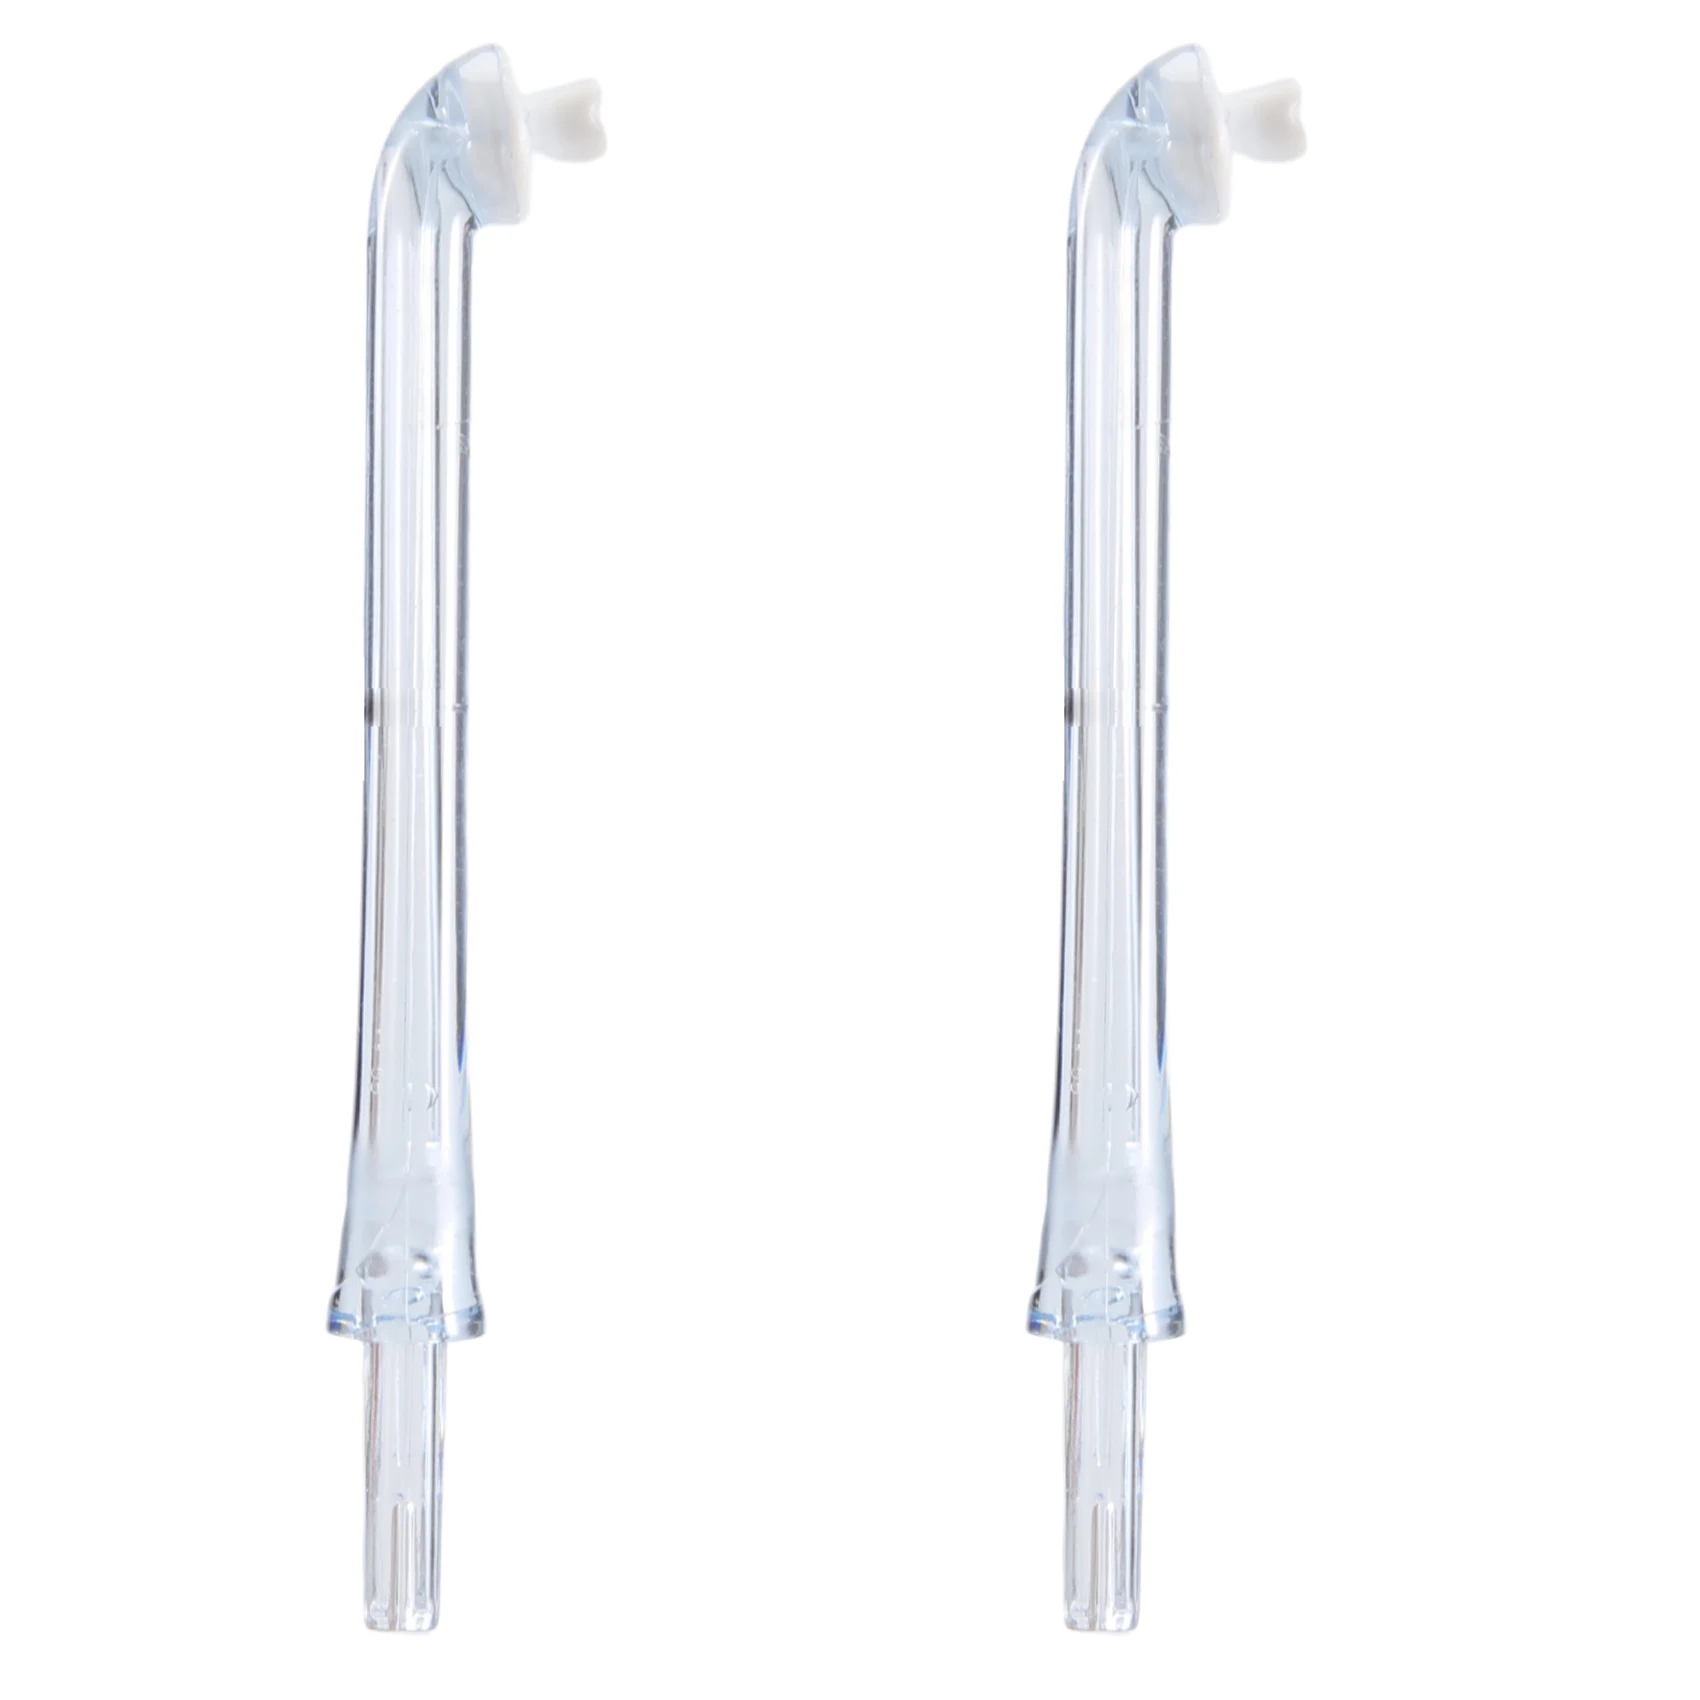 

2Pcs High Quality Nozzle for Philips Sonicare AirFloss HX8331 HX8332 HX8340 HX8341 HX8381 HX8401 Oral Irrigator Nozzle